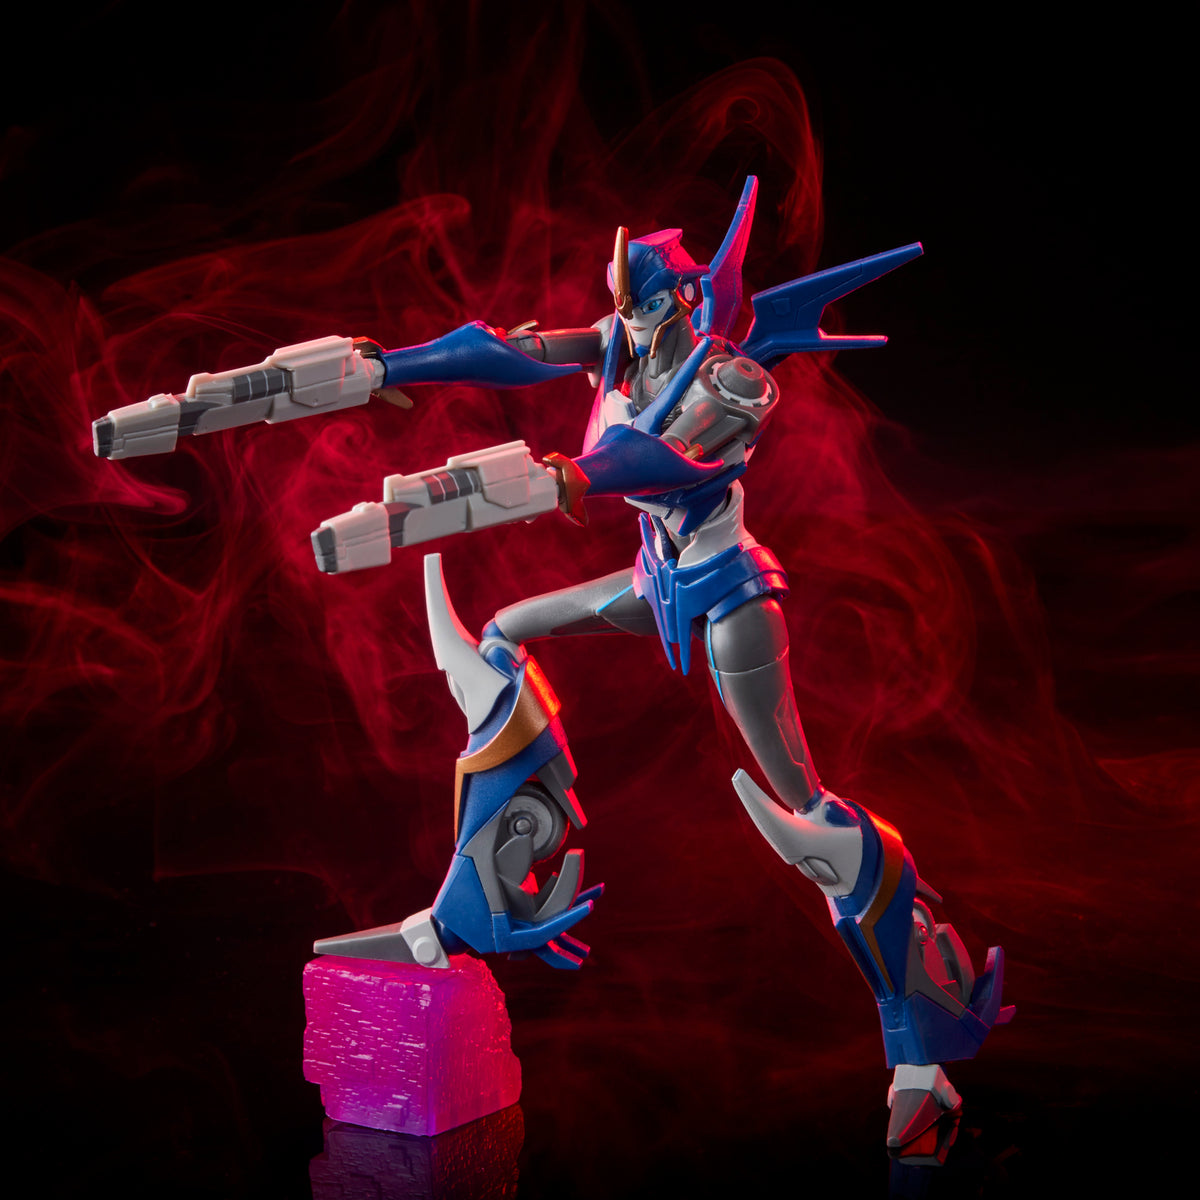 Transformers R.E.D Transformers Prime Arcee In-Hand Review by PrimeVsPrime